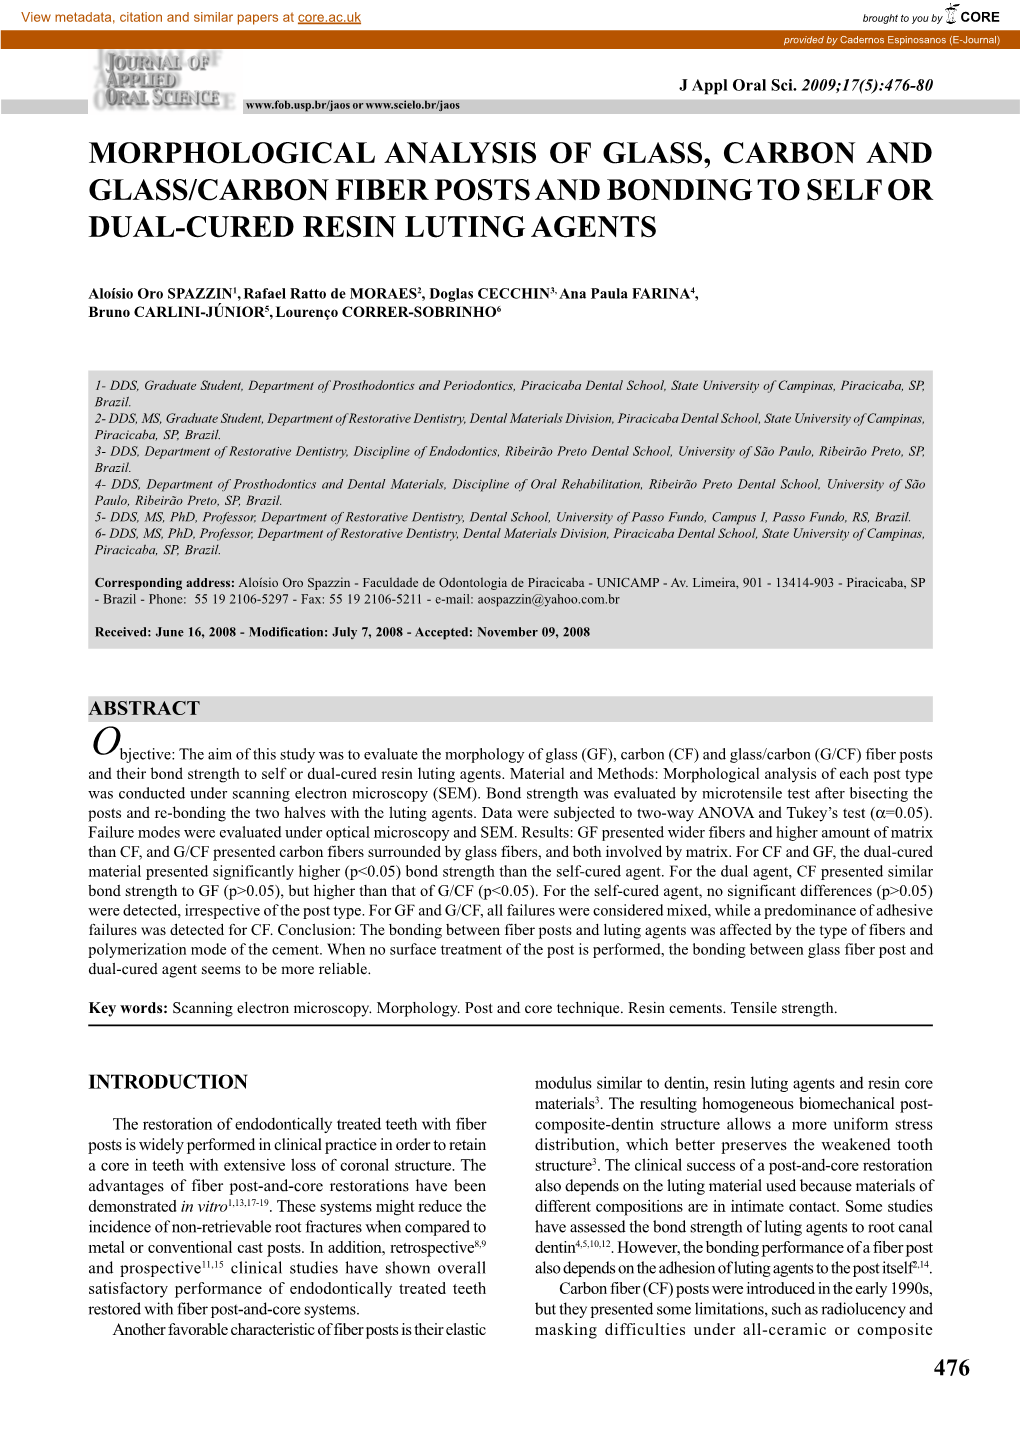 Morphological Analysis of Glass, Carbon and Glass/Carbon Fiber Posts and Bonding to Self Or Dual-Cured Resin Luting Agents